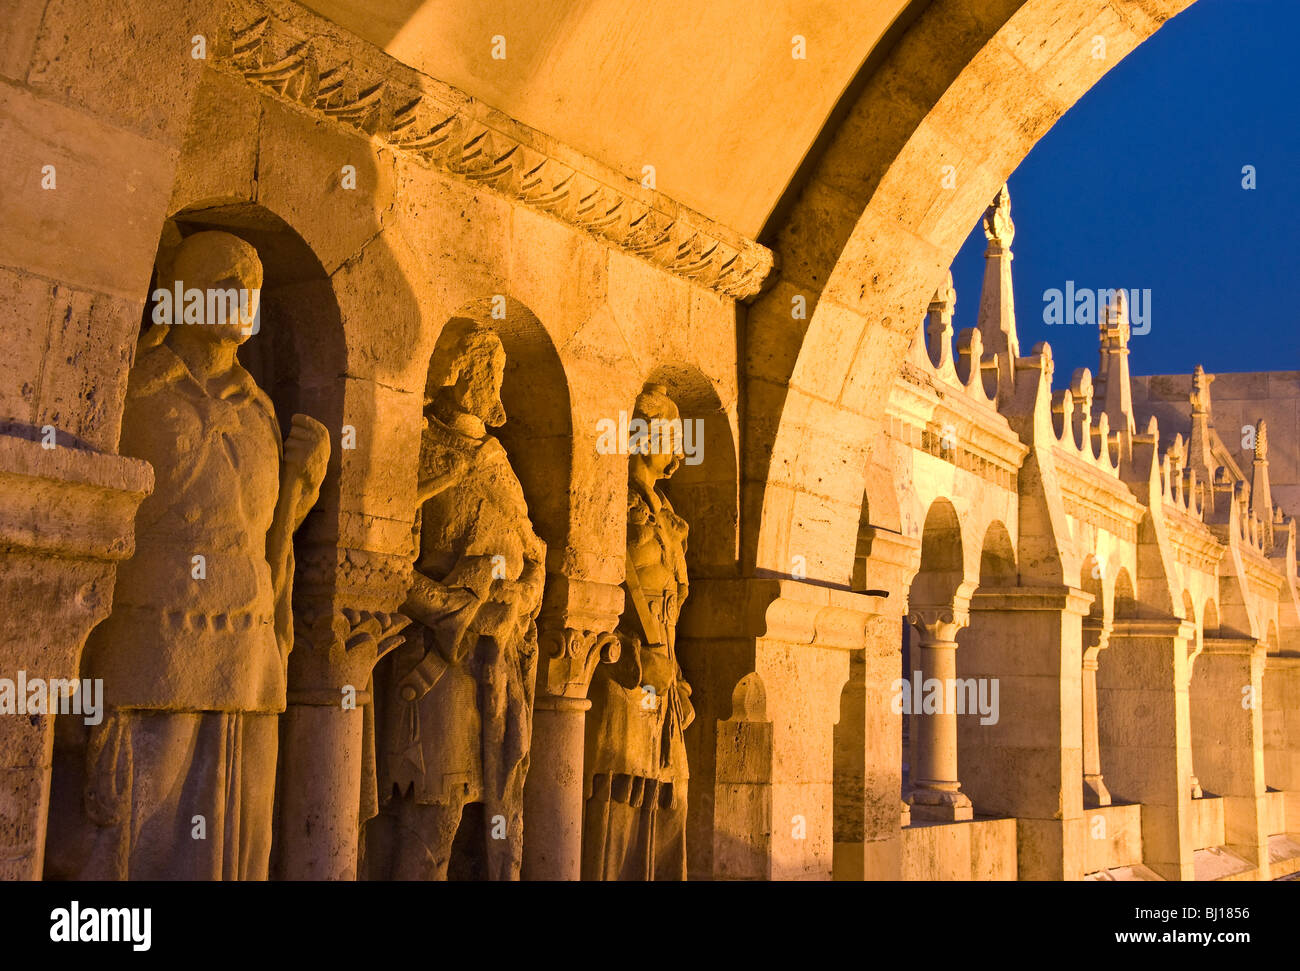 Glow of lights on statues in Fishermen's Bastion on Castle Hill in Budapest, Hungary Stock Photo